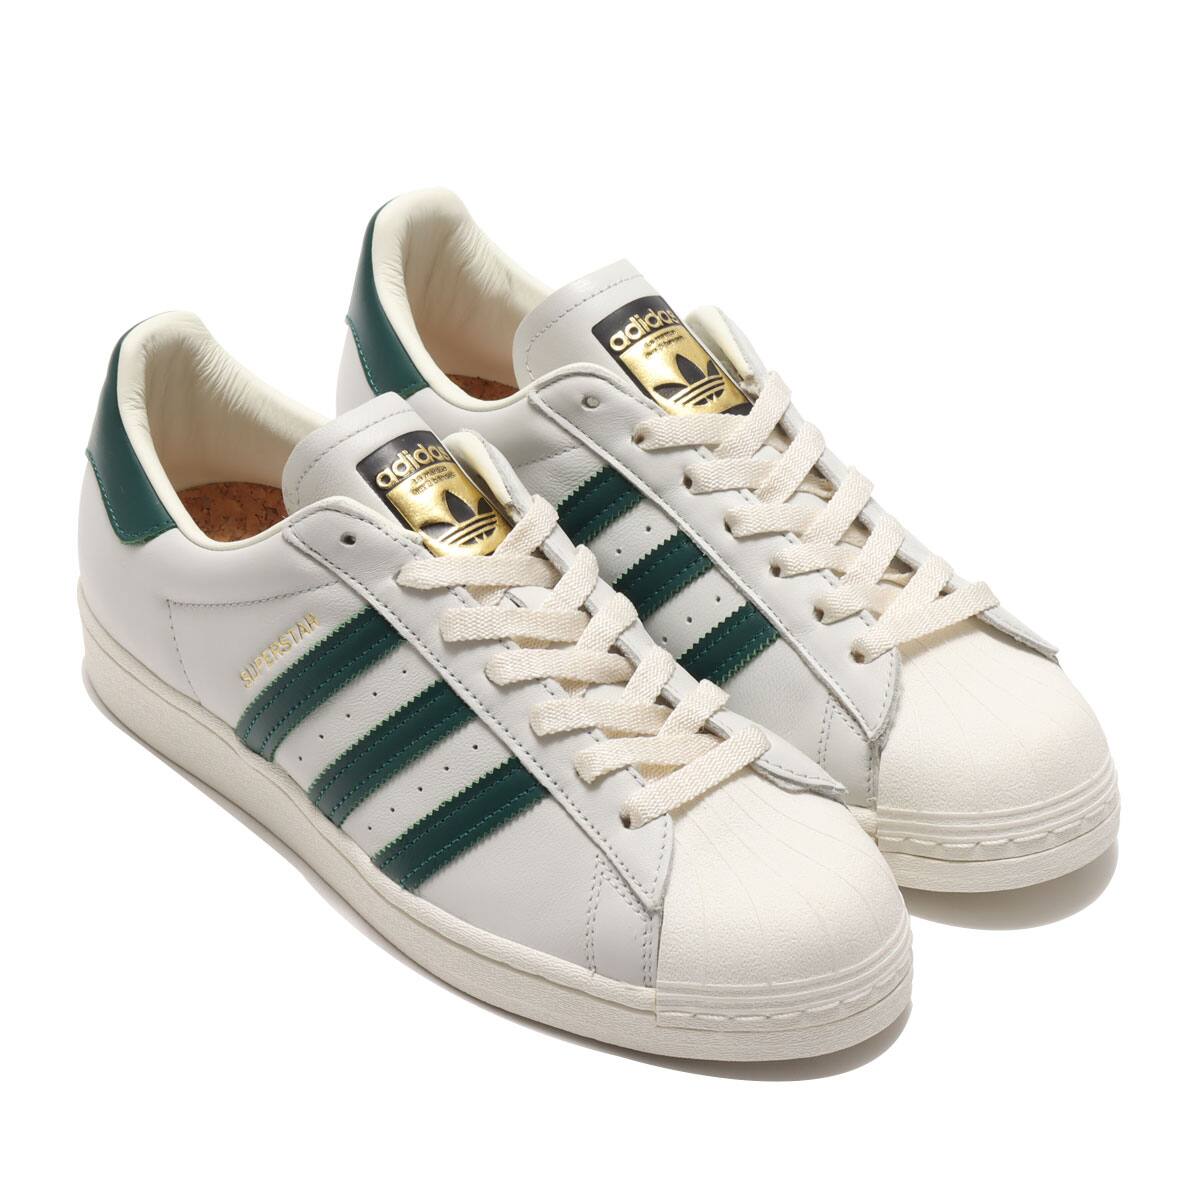 adidas SUPERSTAR OFF WHITE/COLLEGE GREEN/OFF WHITE 21SS-I